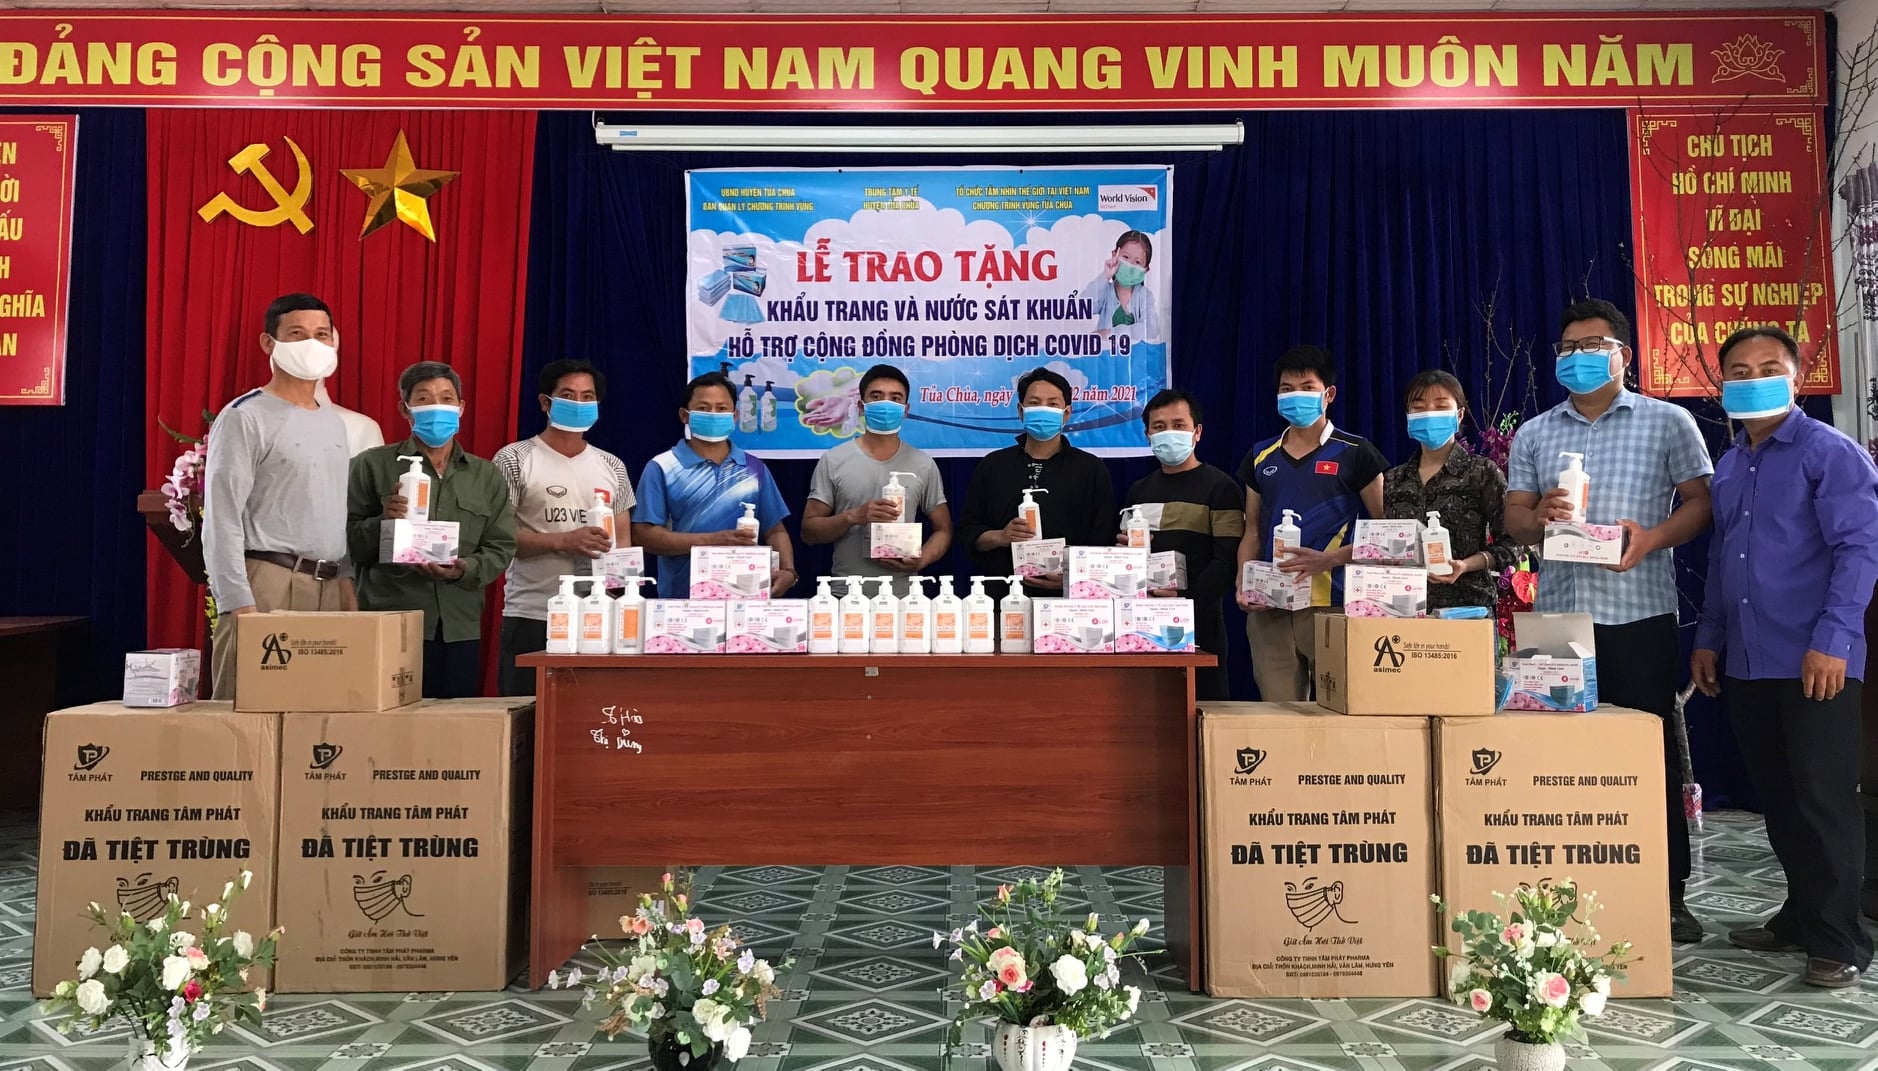 NGO present medical supplies for COVID 19 prevention to border province